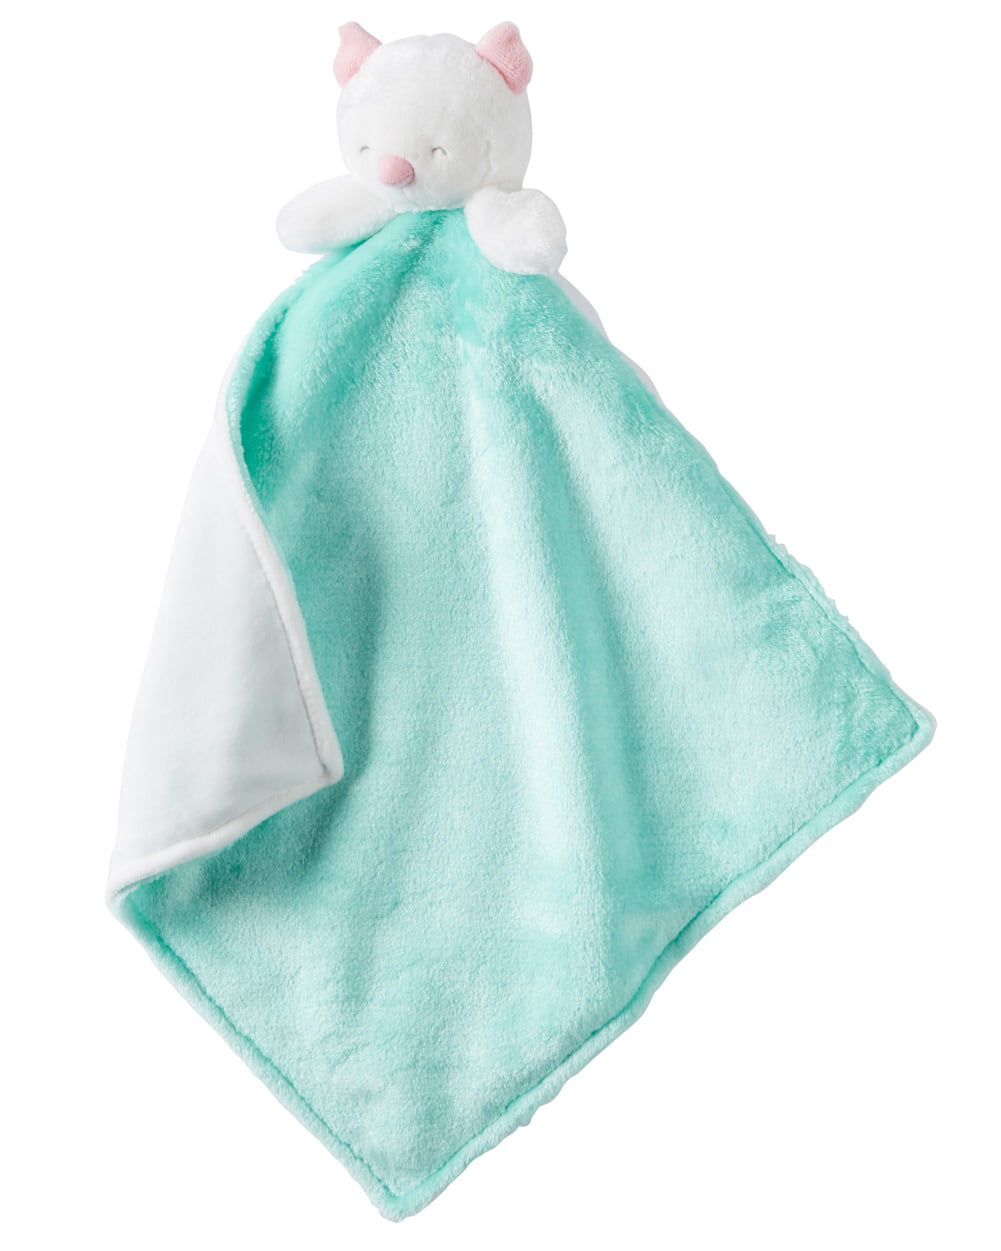 NWT Carters Aqua Blue Mint Green And White Owl Security Blanket Plush Baby Toy 